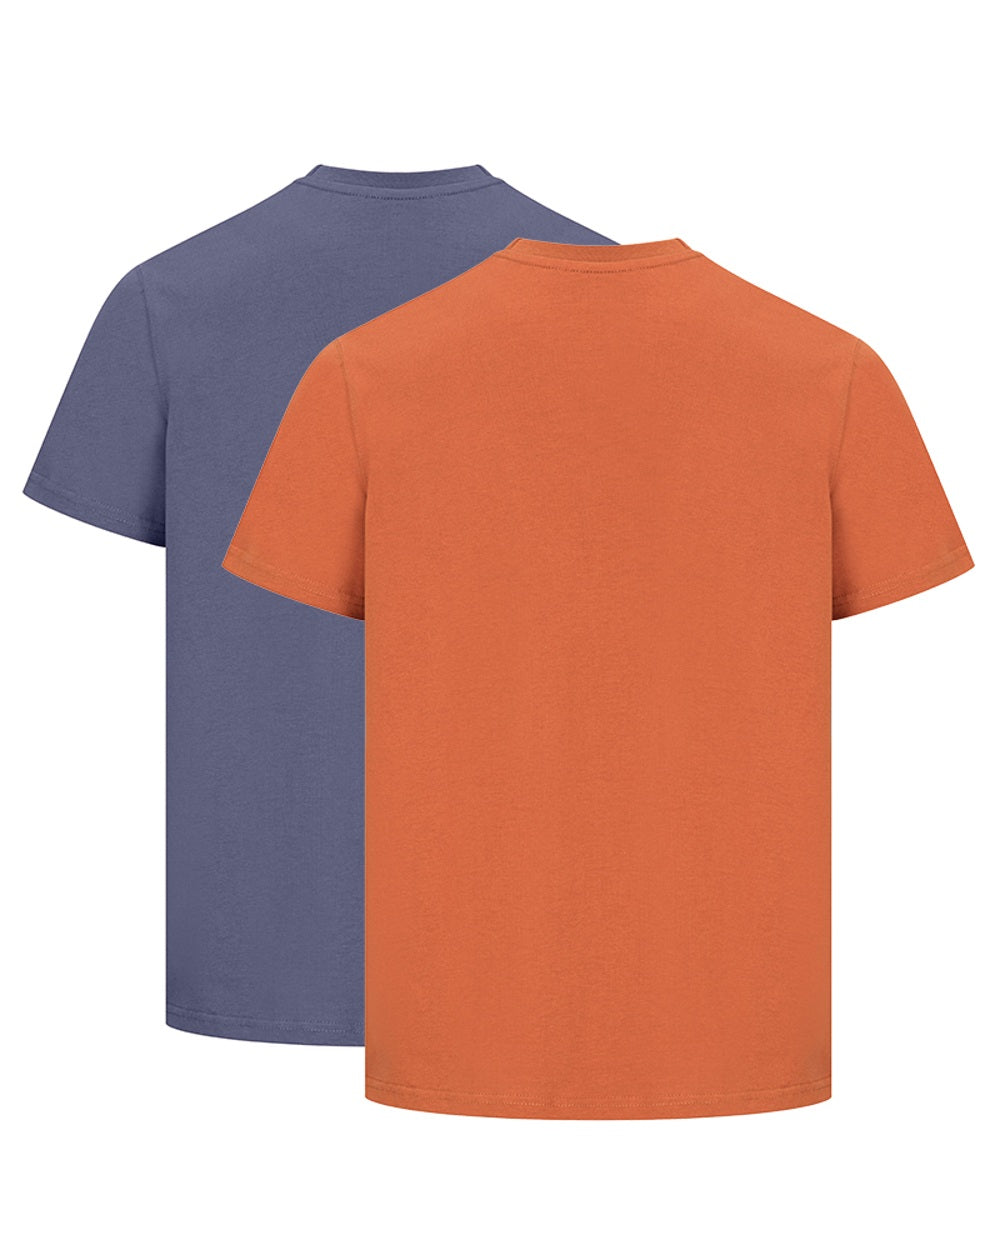 Hoggs of Fife Sandwood 2 Pack Cotton T-Shirts in Slate/Rust 